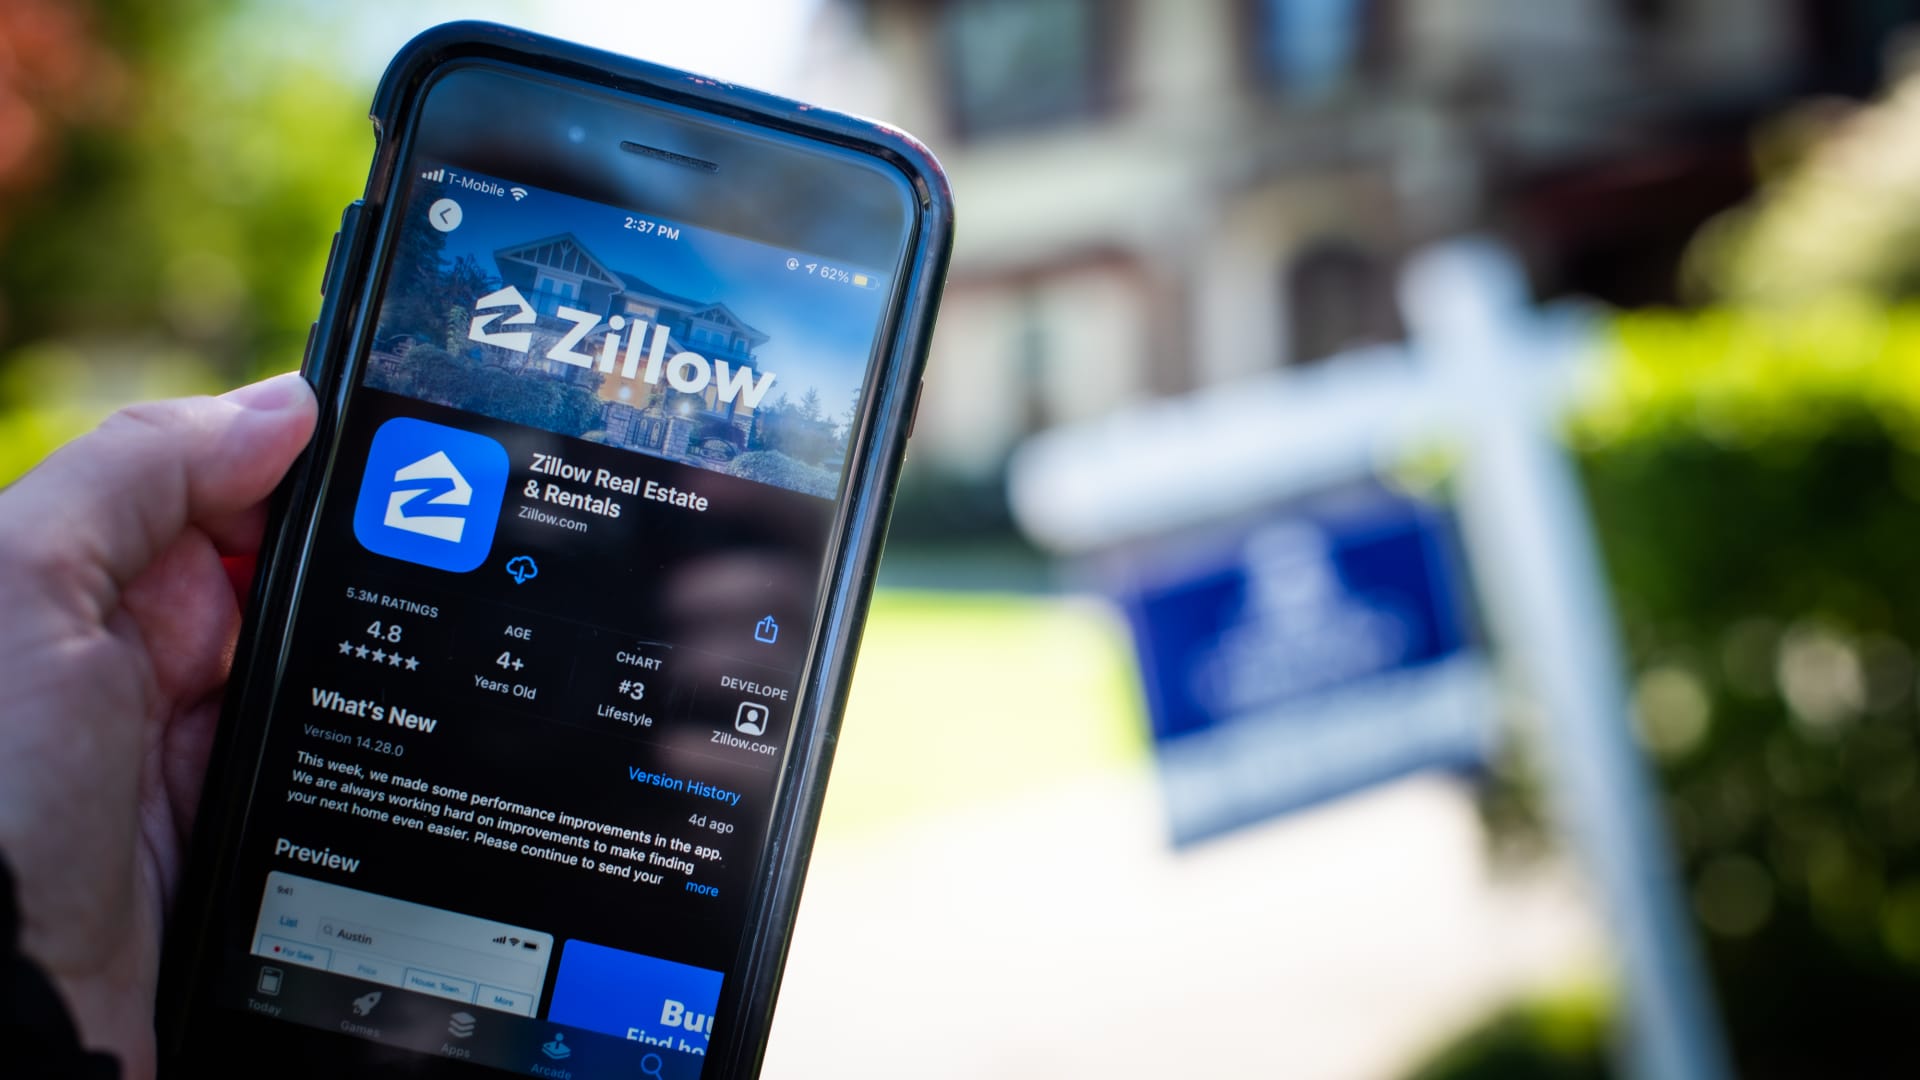 The Zillow app on a mobile phone arranged in Dobbs Ferry, New York, U.S., on Saturday, May 1, 2021.